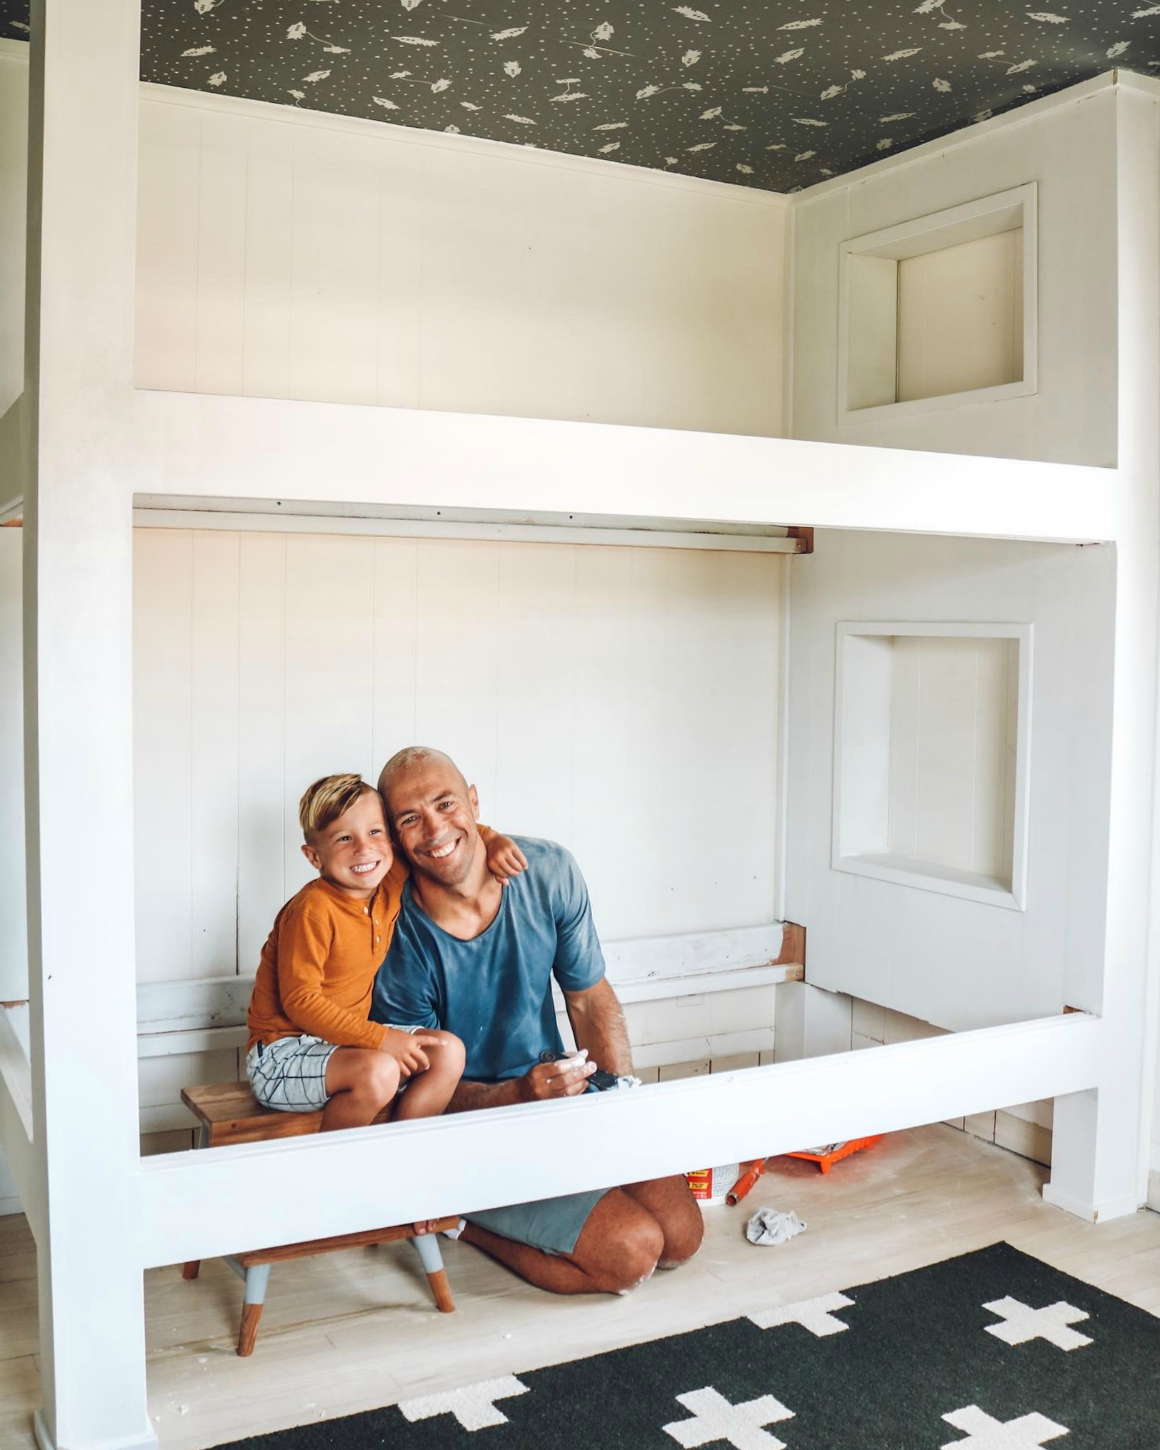 Built In Bunkbed Diy For 500 Nesting, Custom Made Bunk Beds For Small Rooms